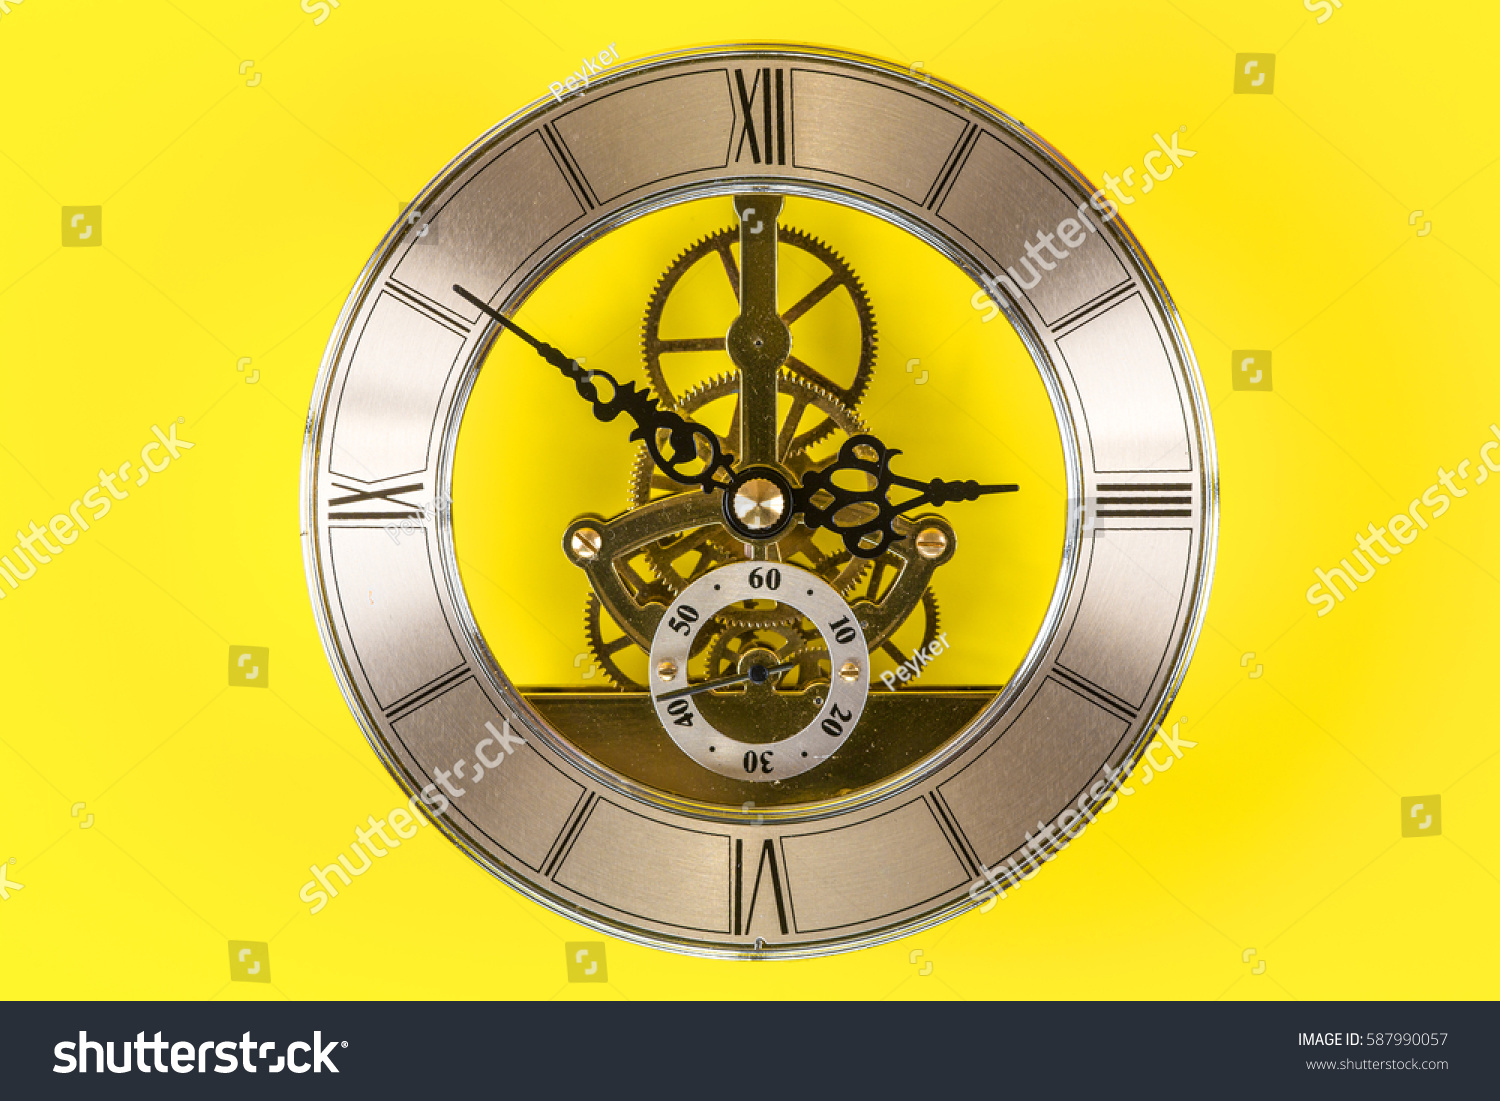 Vintage bronze clock isolated on a yellow background #587990057